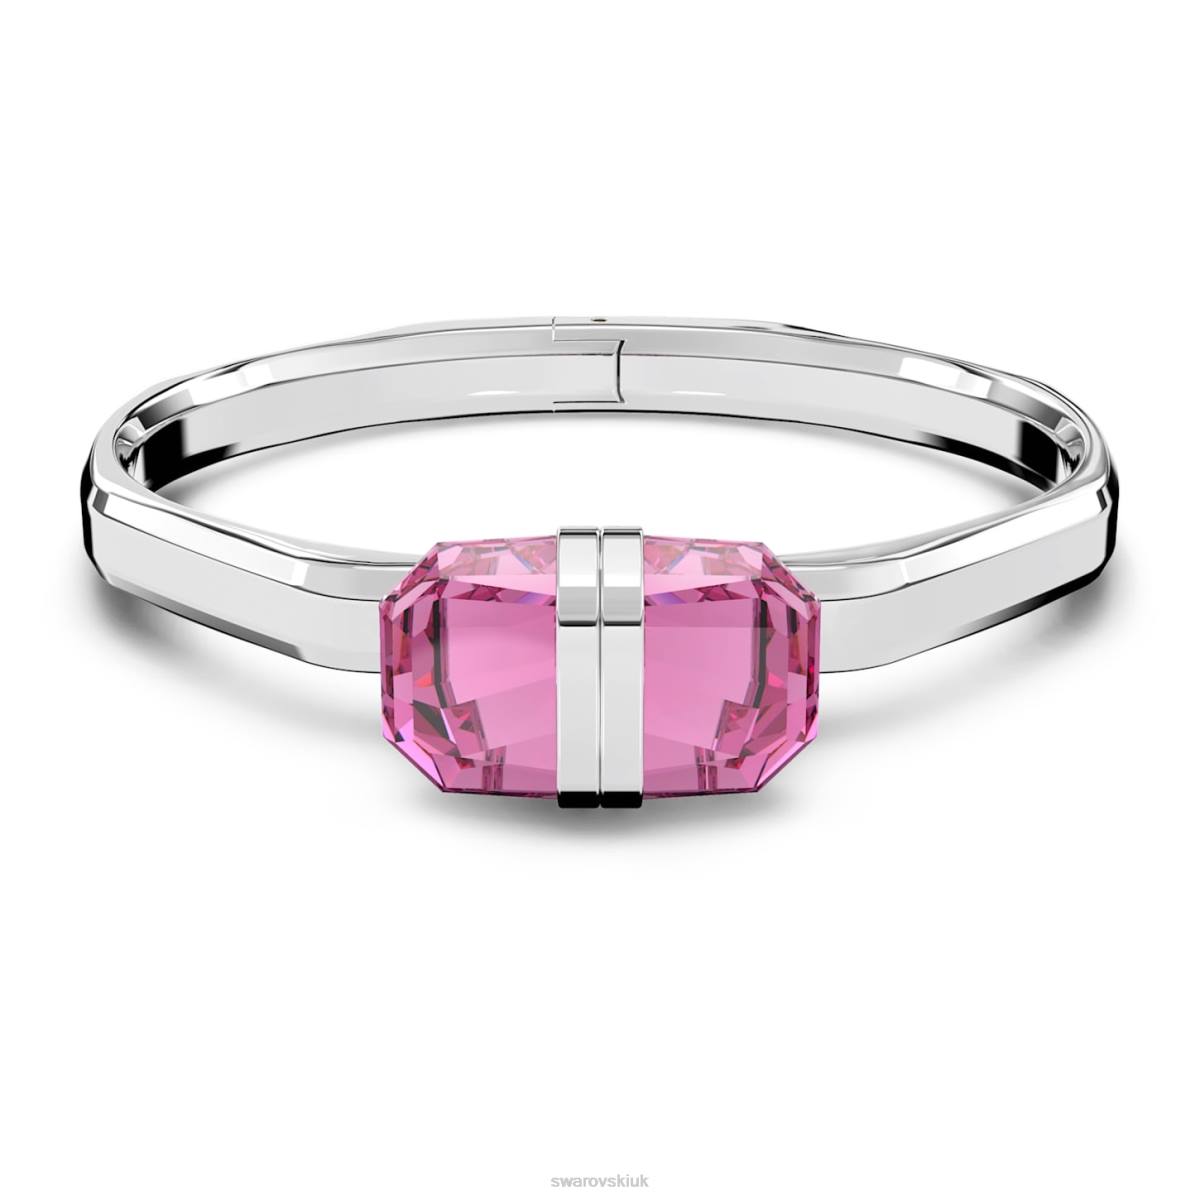 Jewelry Swarovski Lucent bangle Magnetic closure, Pink, Stainless steel 48JX618